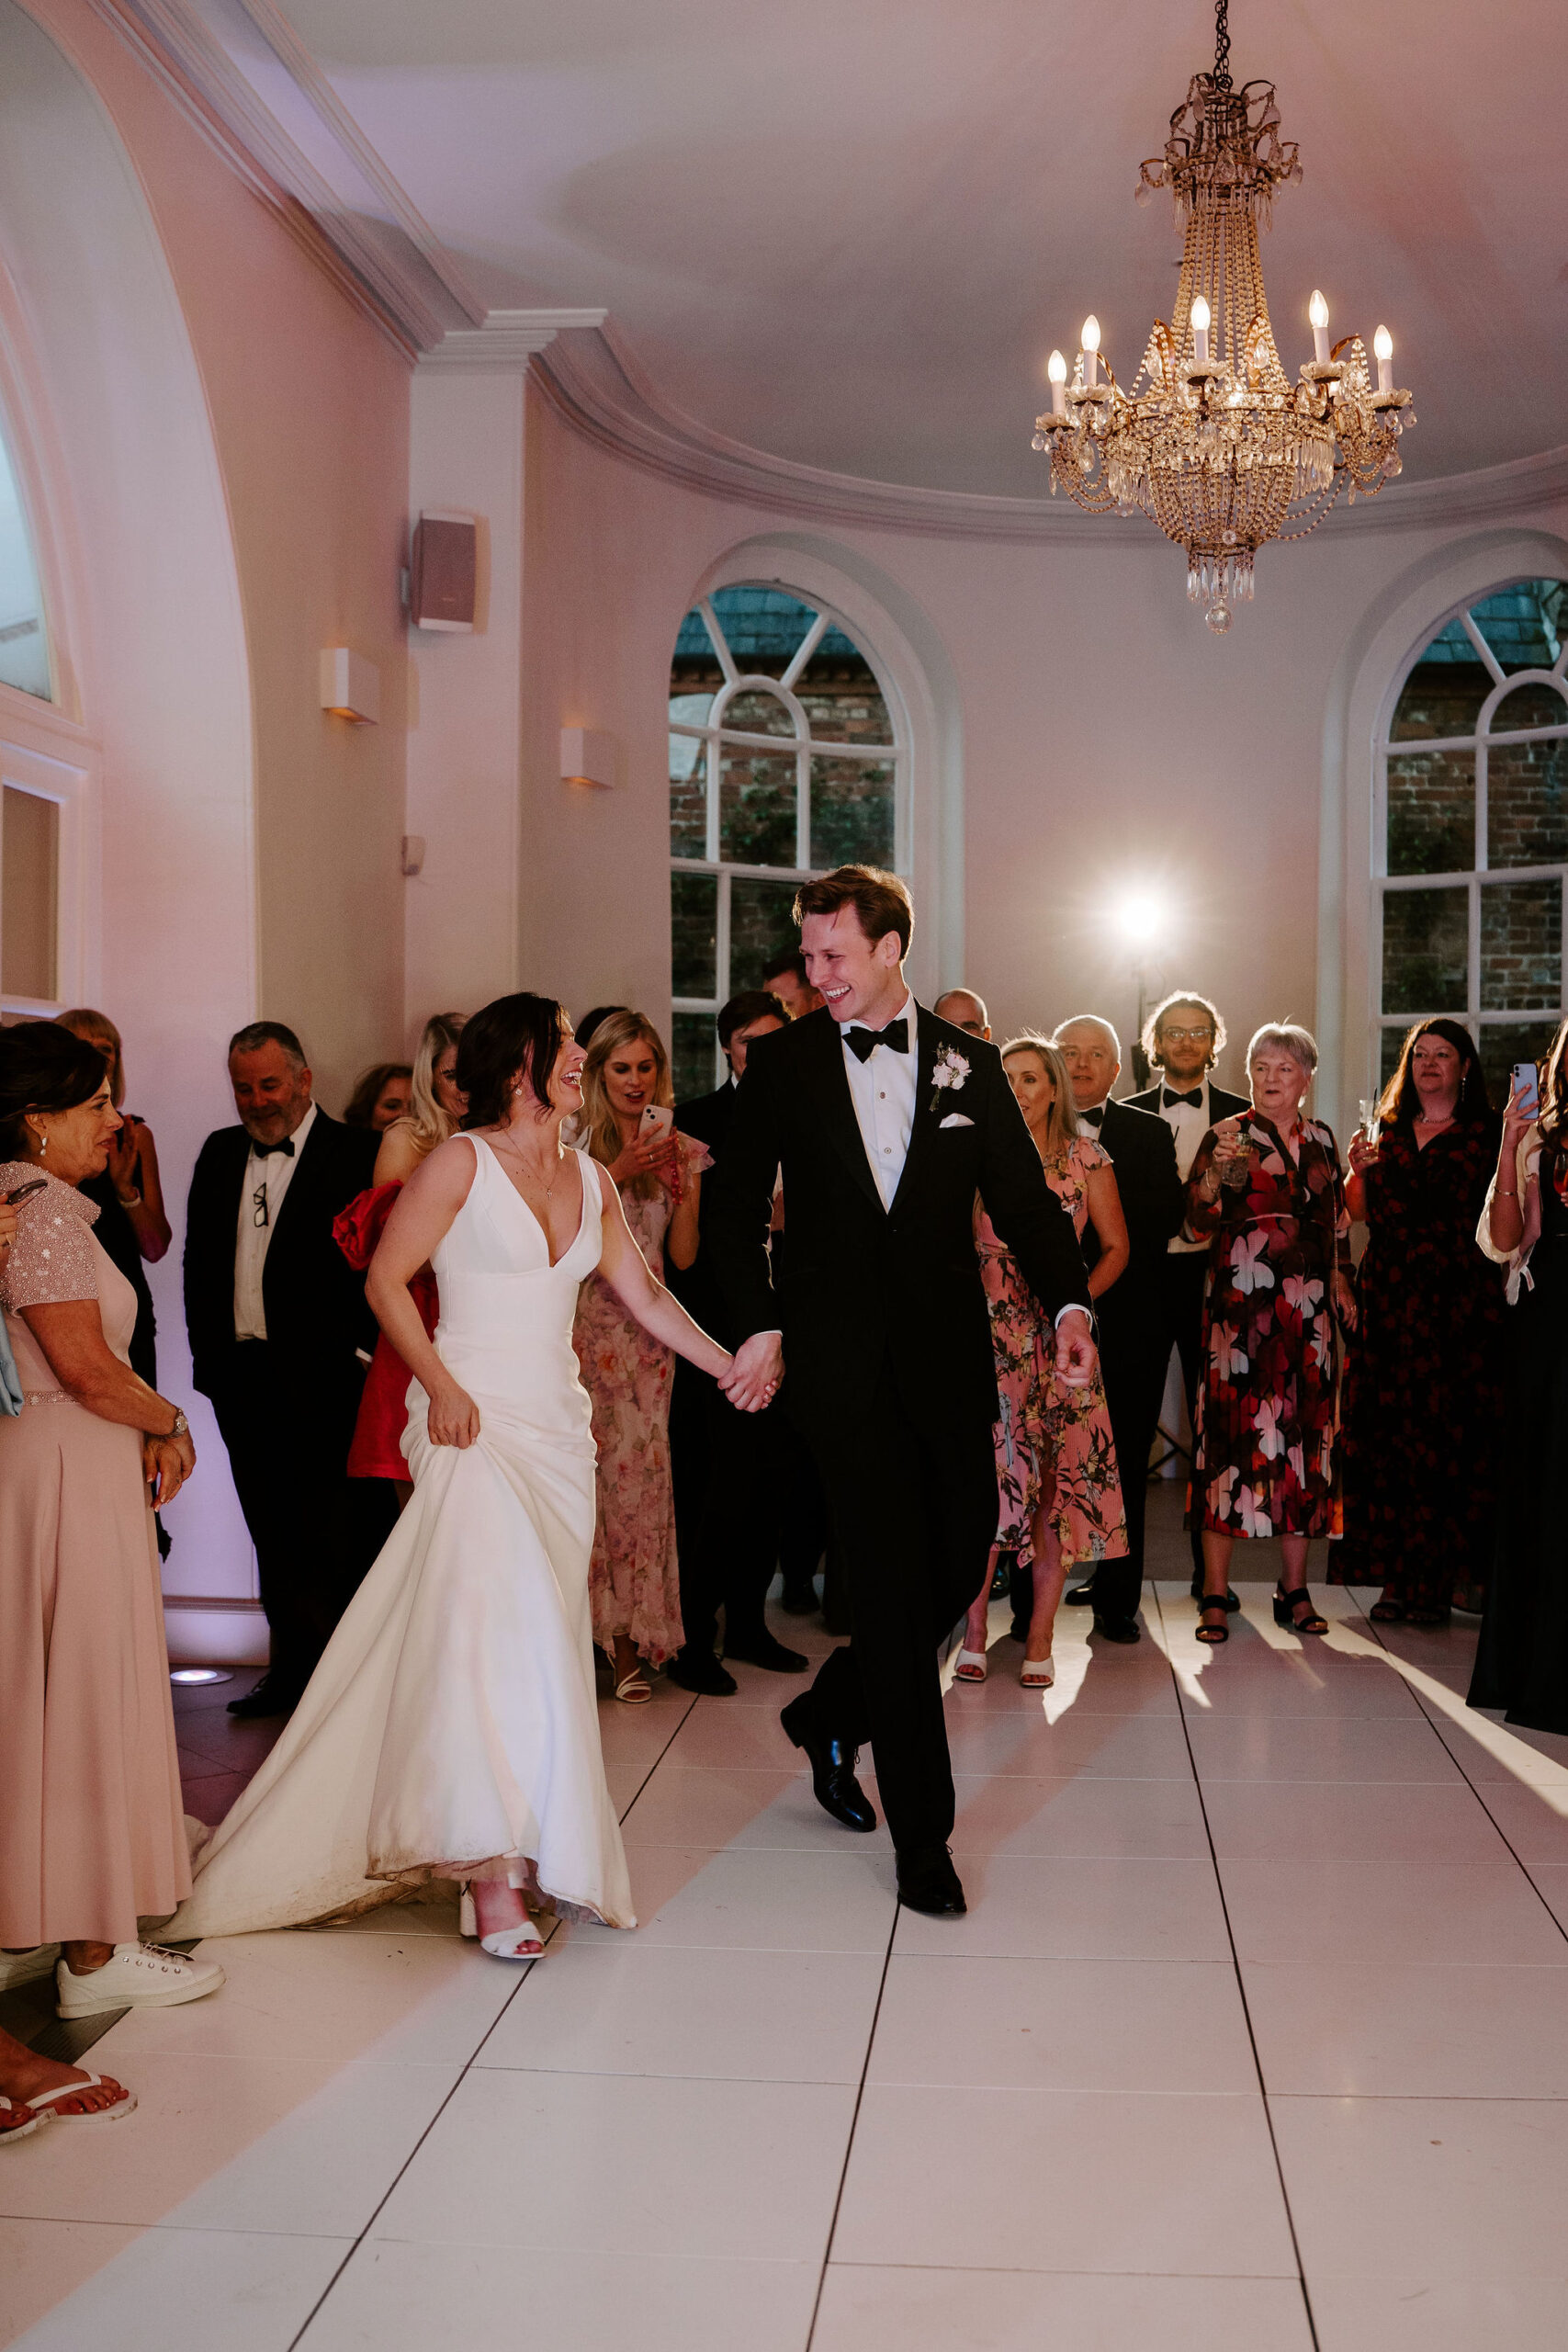 A bride and groom step out onto the dance floor whilst guests congregate around the edges to watch